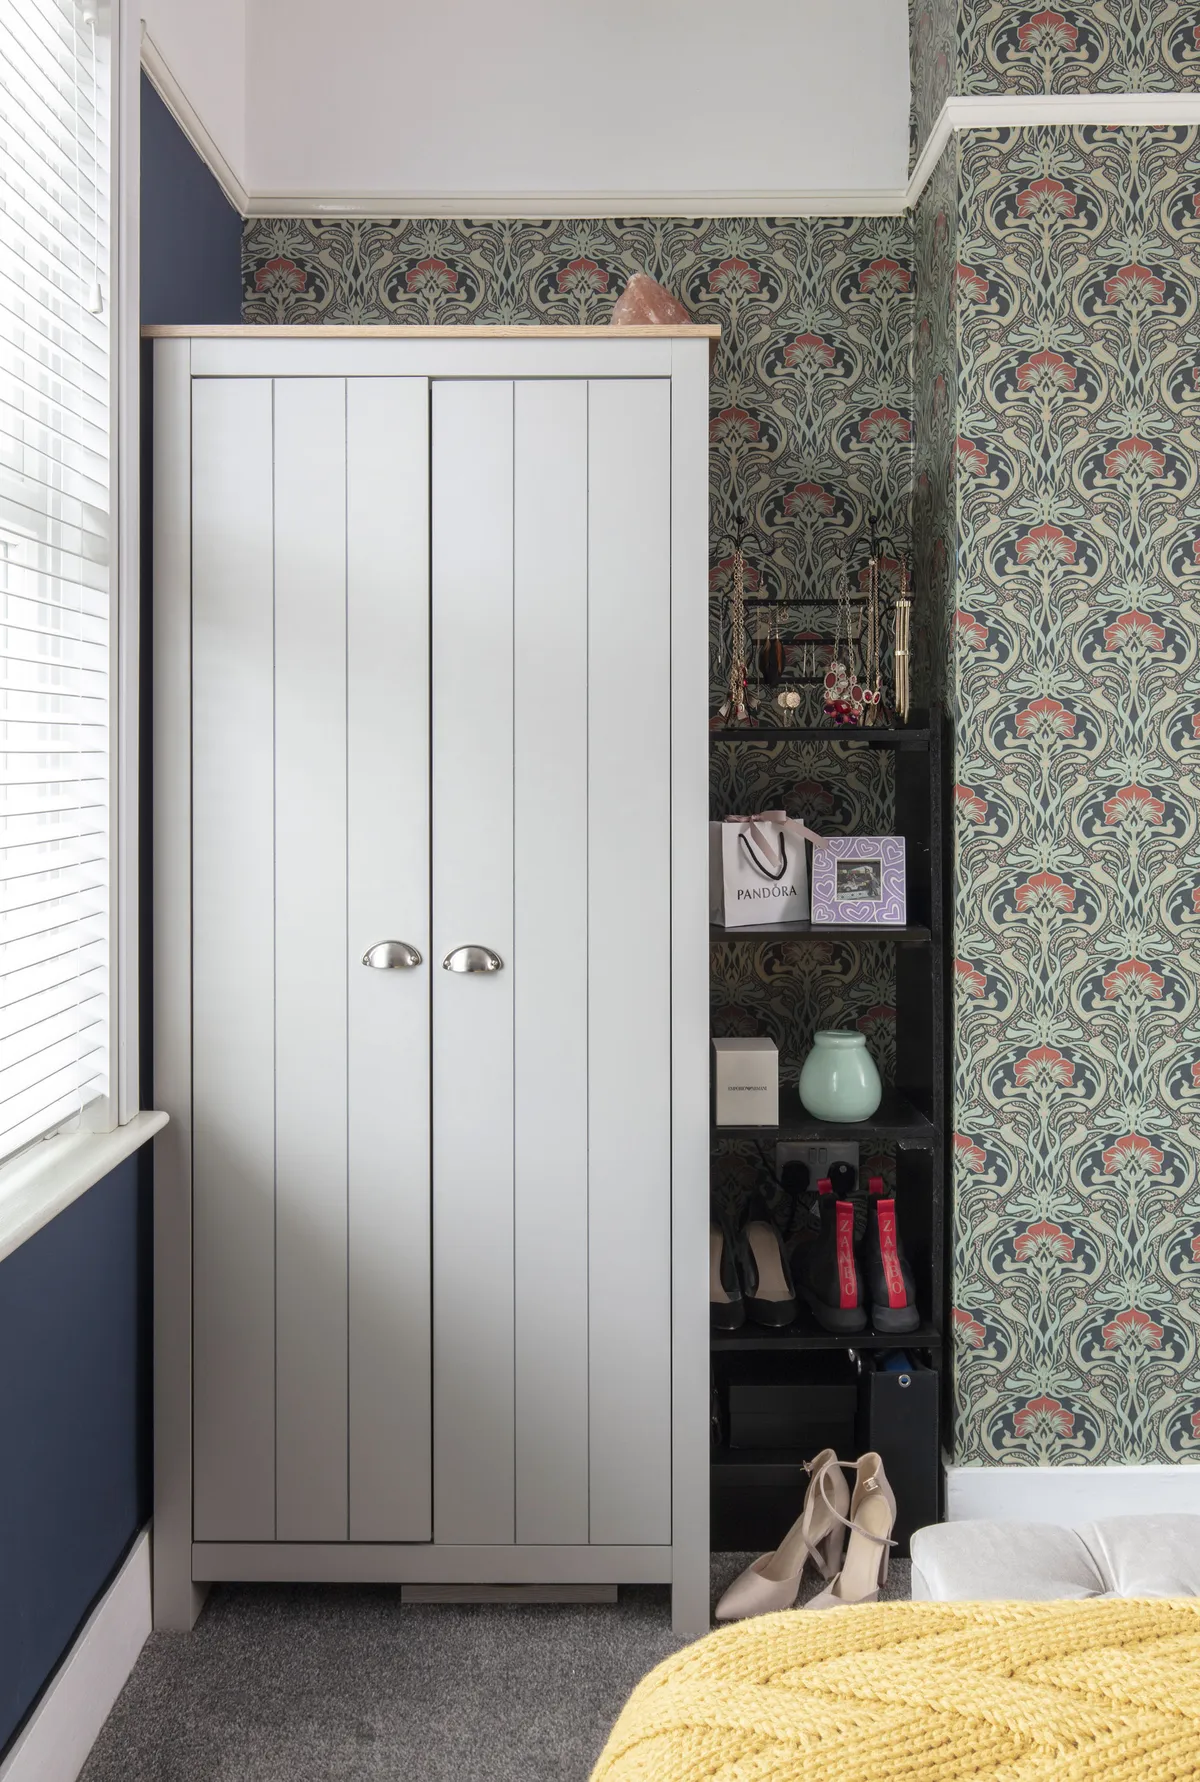 To contrast with the bedroom’s navy walls, Diandra chose a Flora Nouveau Peacock print from Dunelm for her first go at wallpapering. ‘We chickened out of using it in the living room,’ she says. ‘But in here I felt we could be a little braver with pattern’